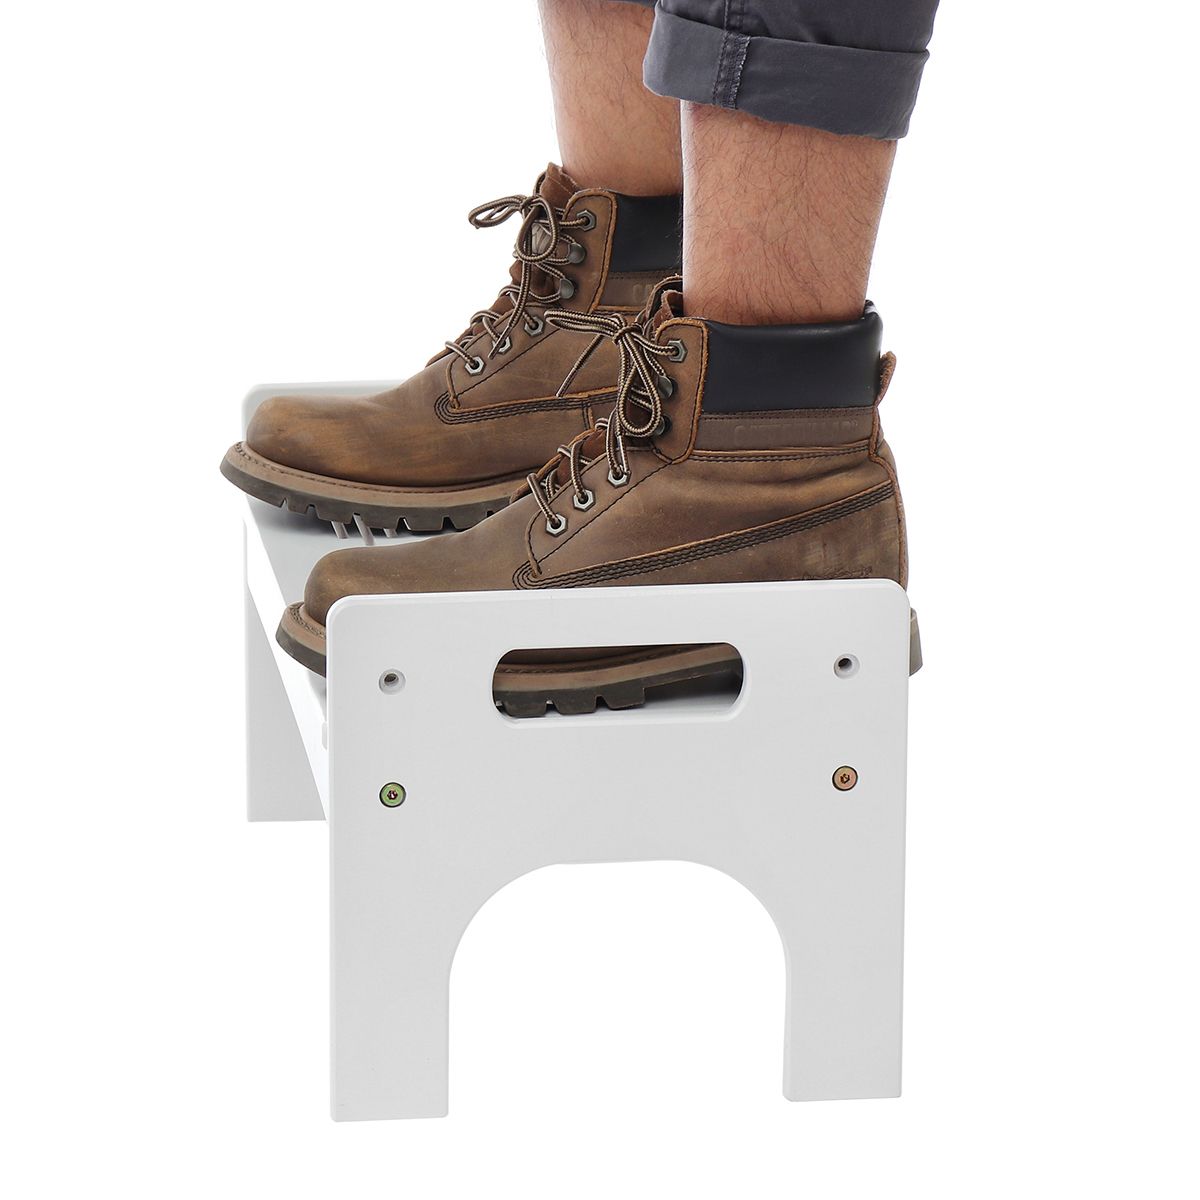 Bathroom-Anti-Constipation-For-Kids-Foldable-Plastic-Footstool-Squatting-Stool-Toilet-dropshipping-1528579